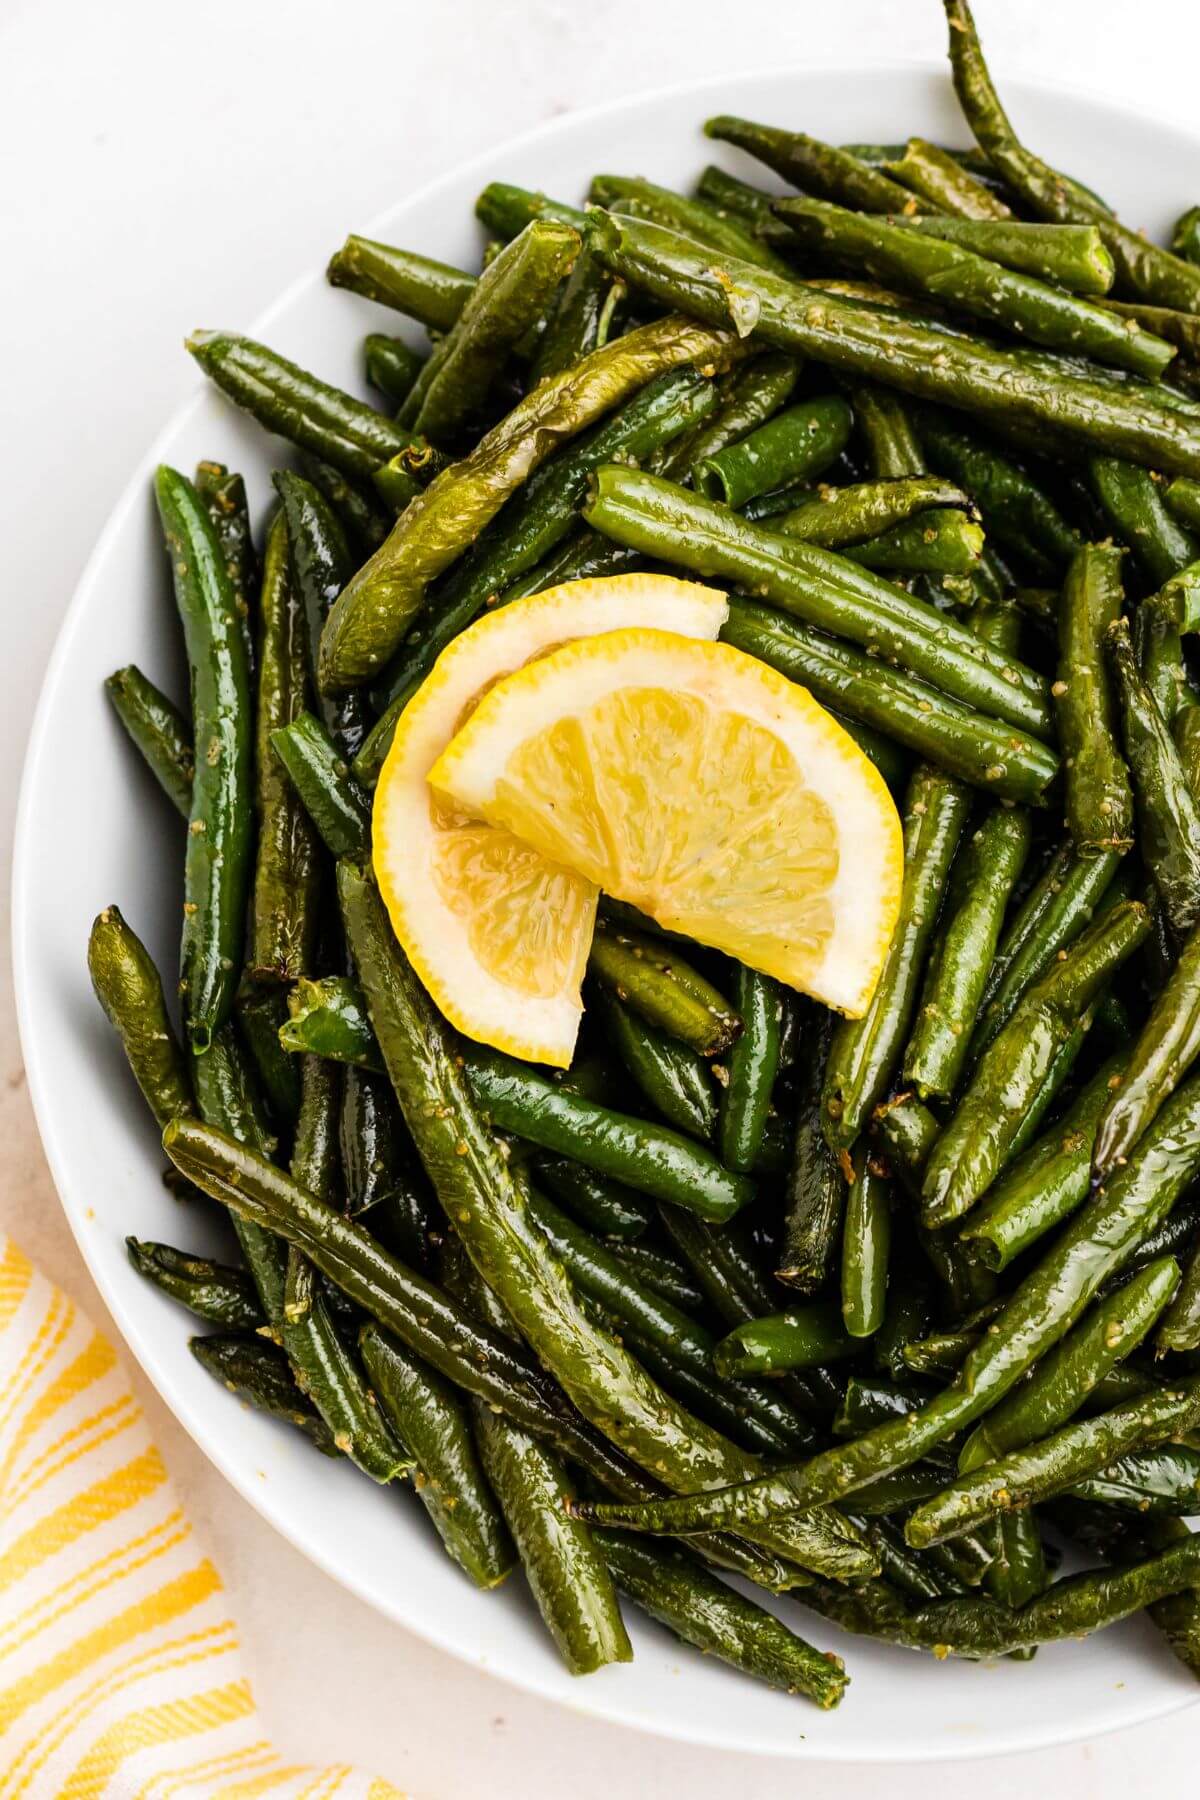 Juicy green beans in a white bowl topped with lemon wedges.